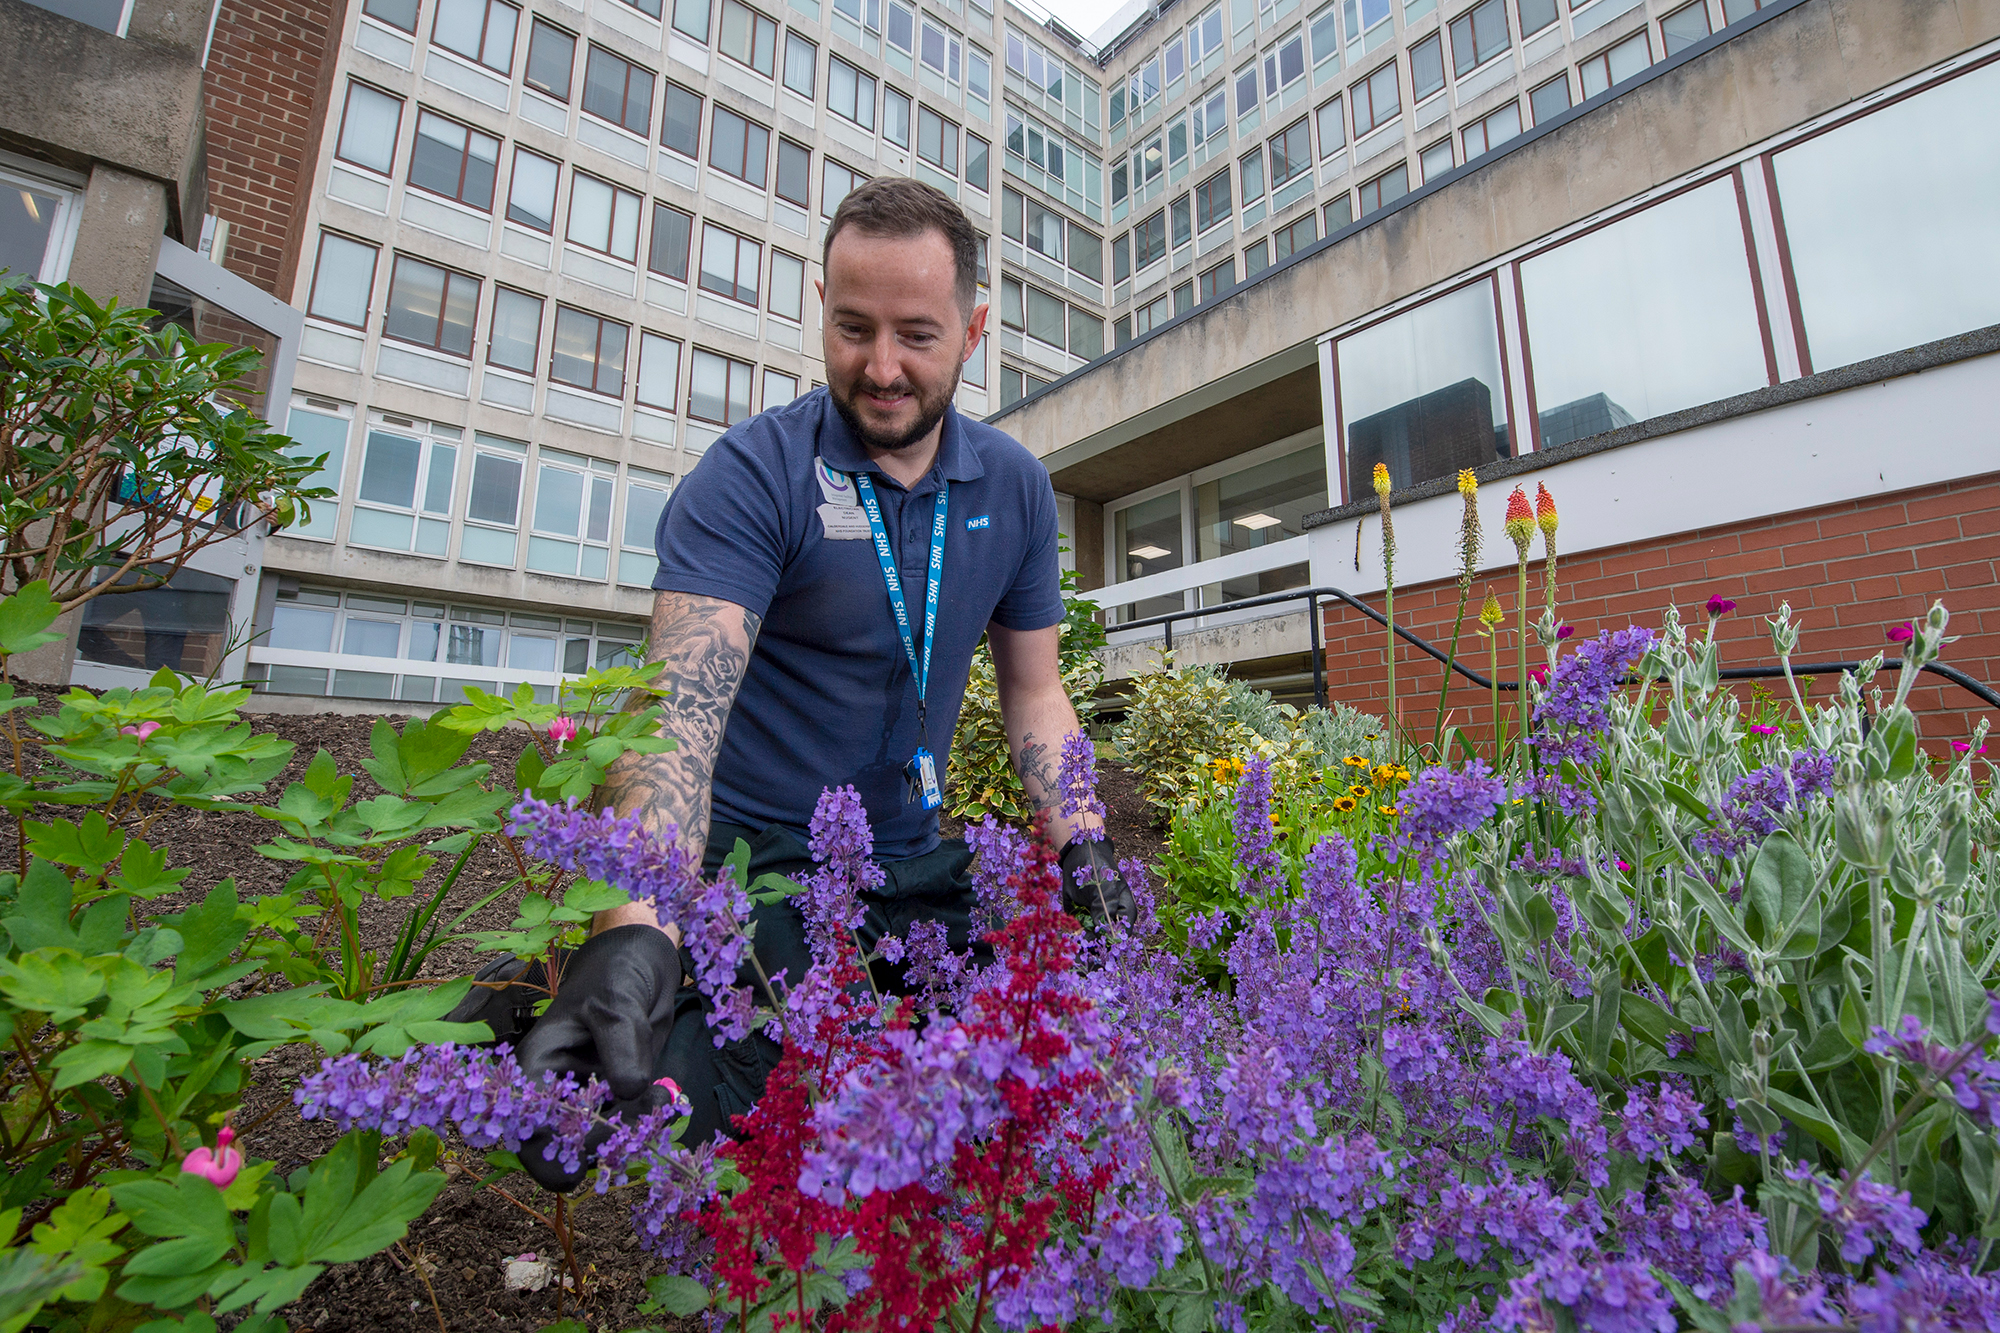 Male staff member gardening at a hospital site.